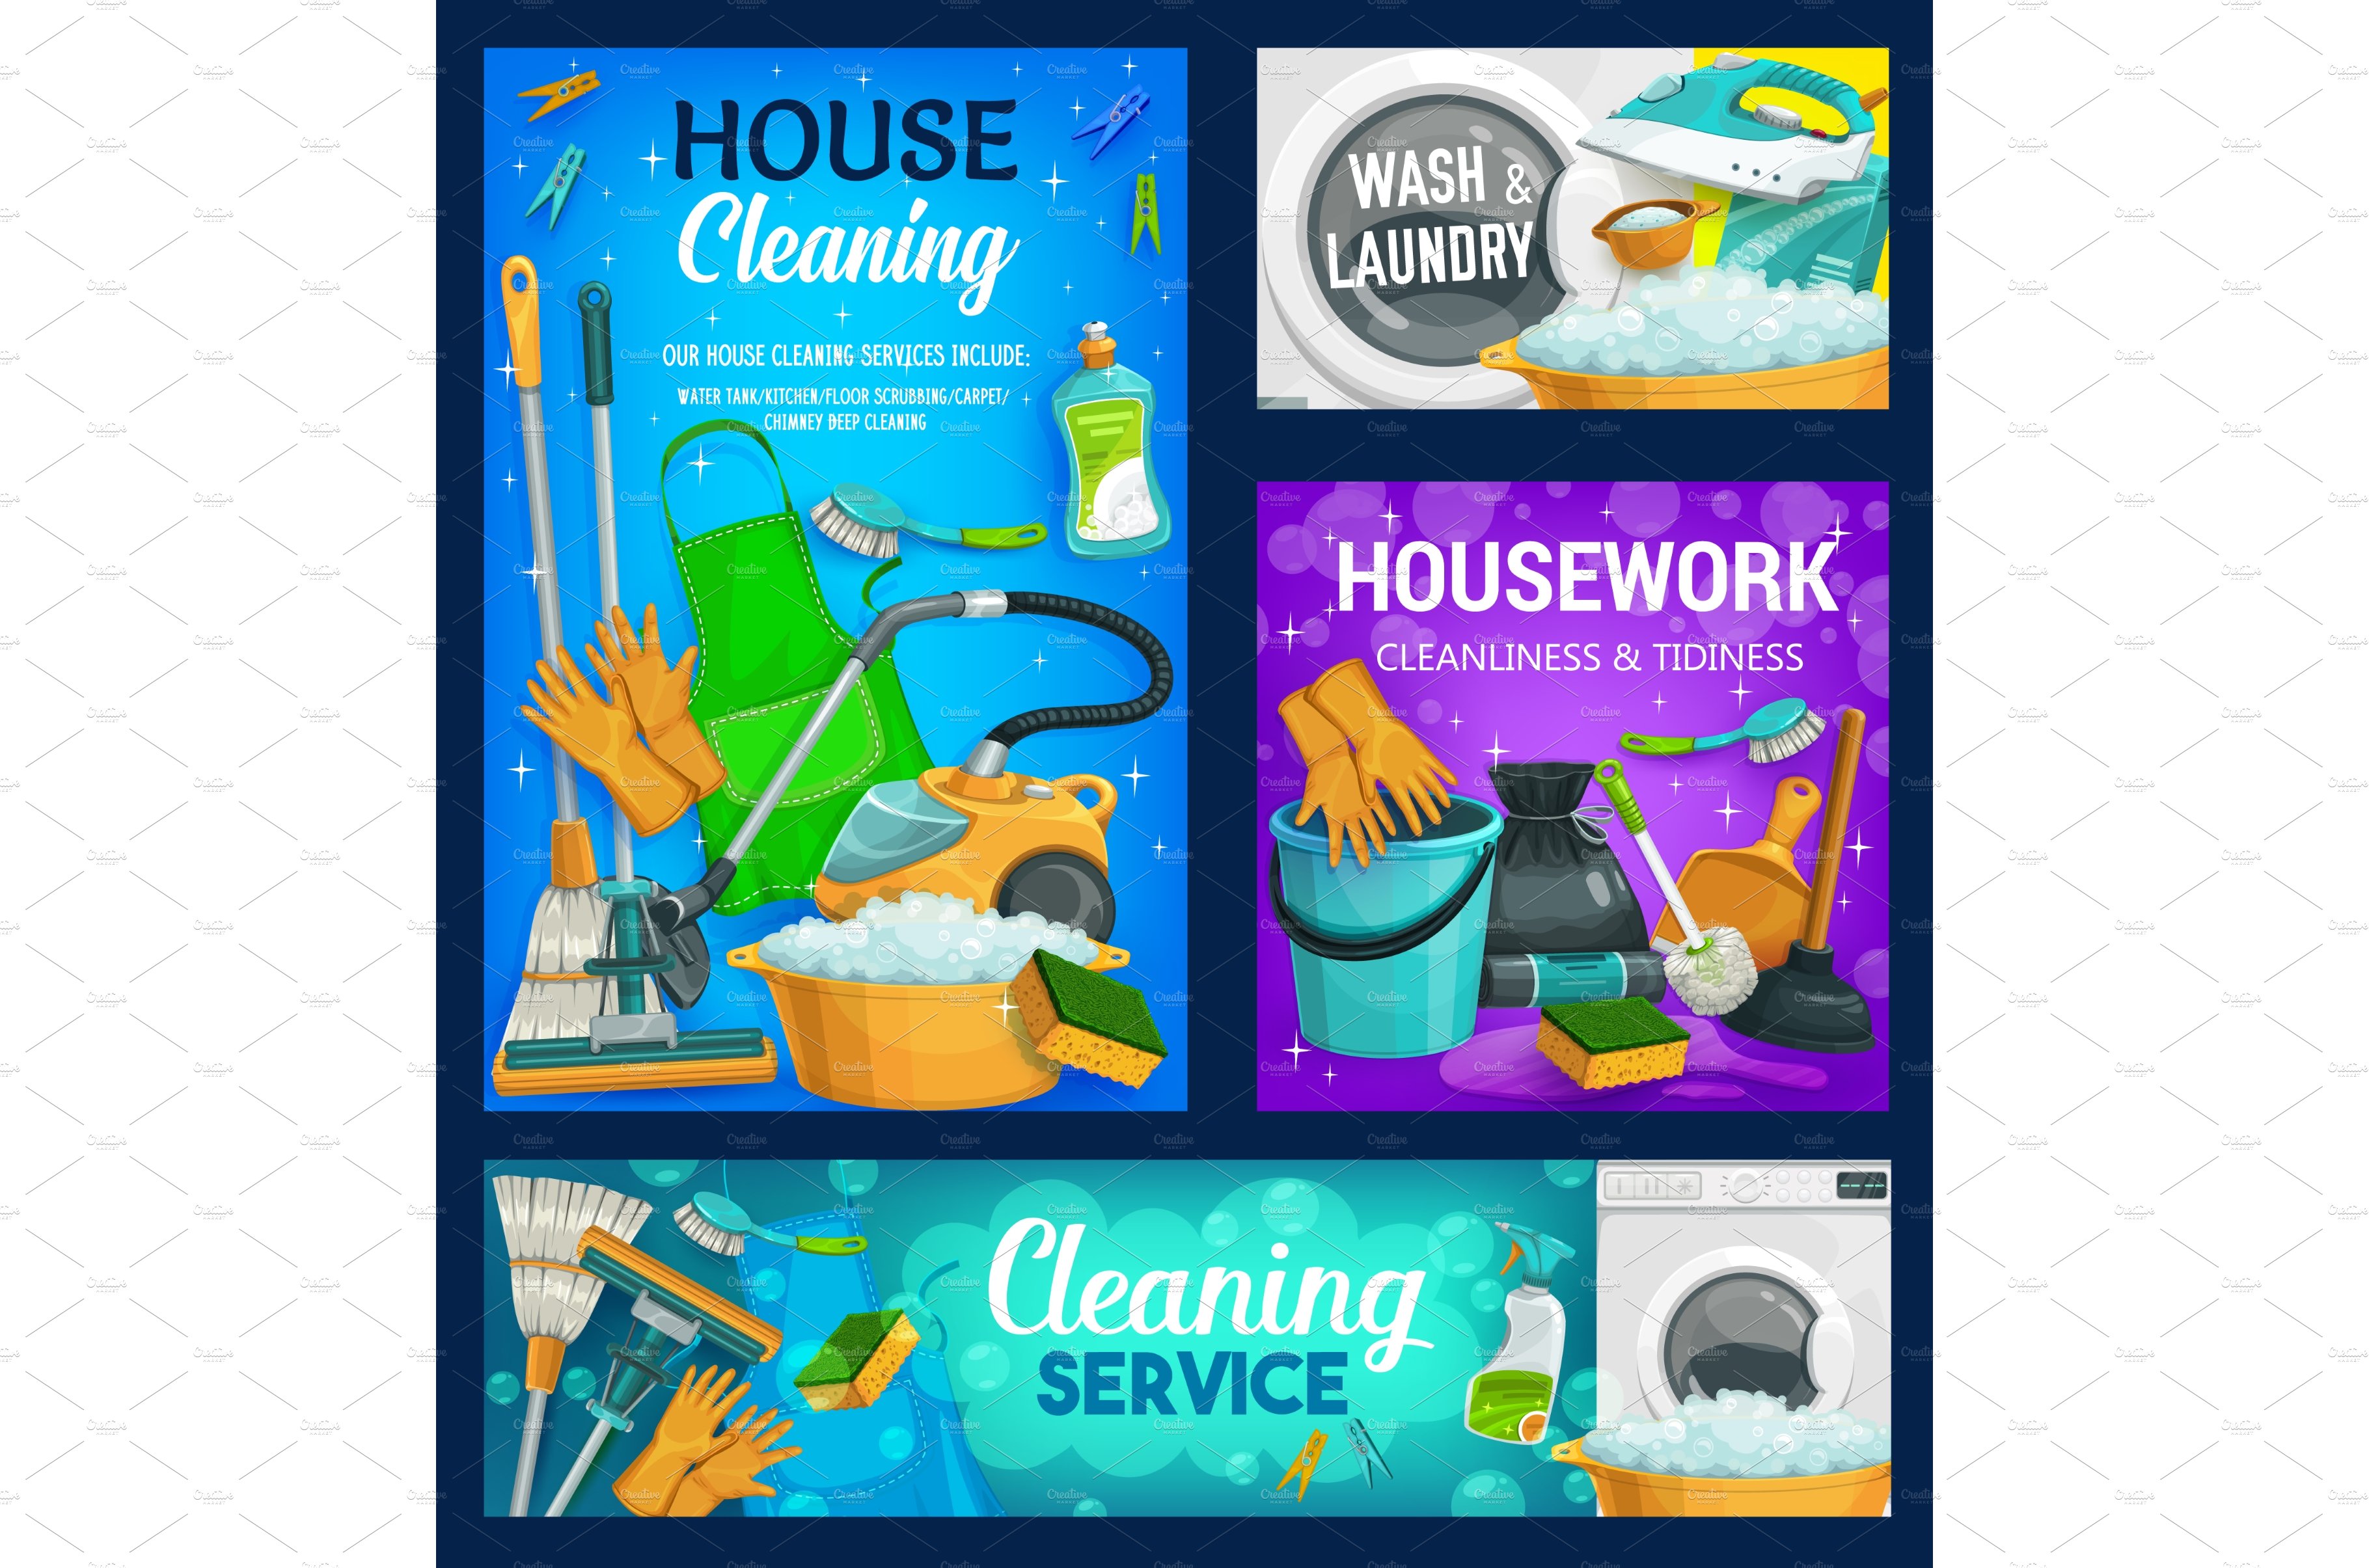 House cleaning service cover image.